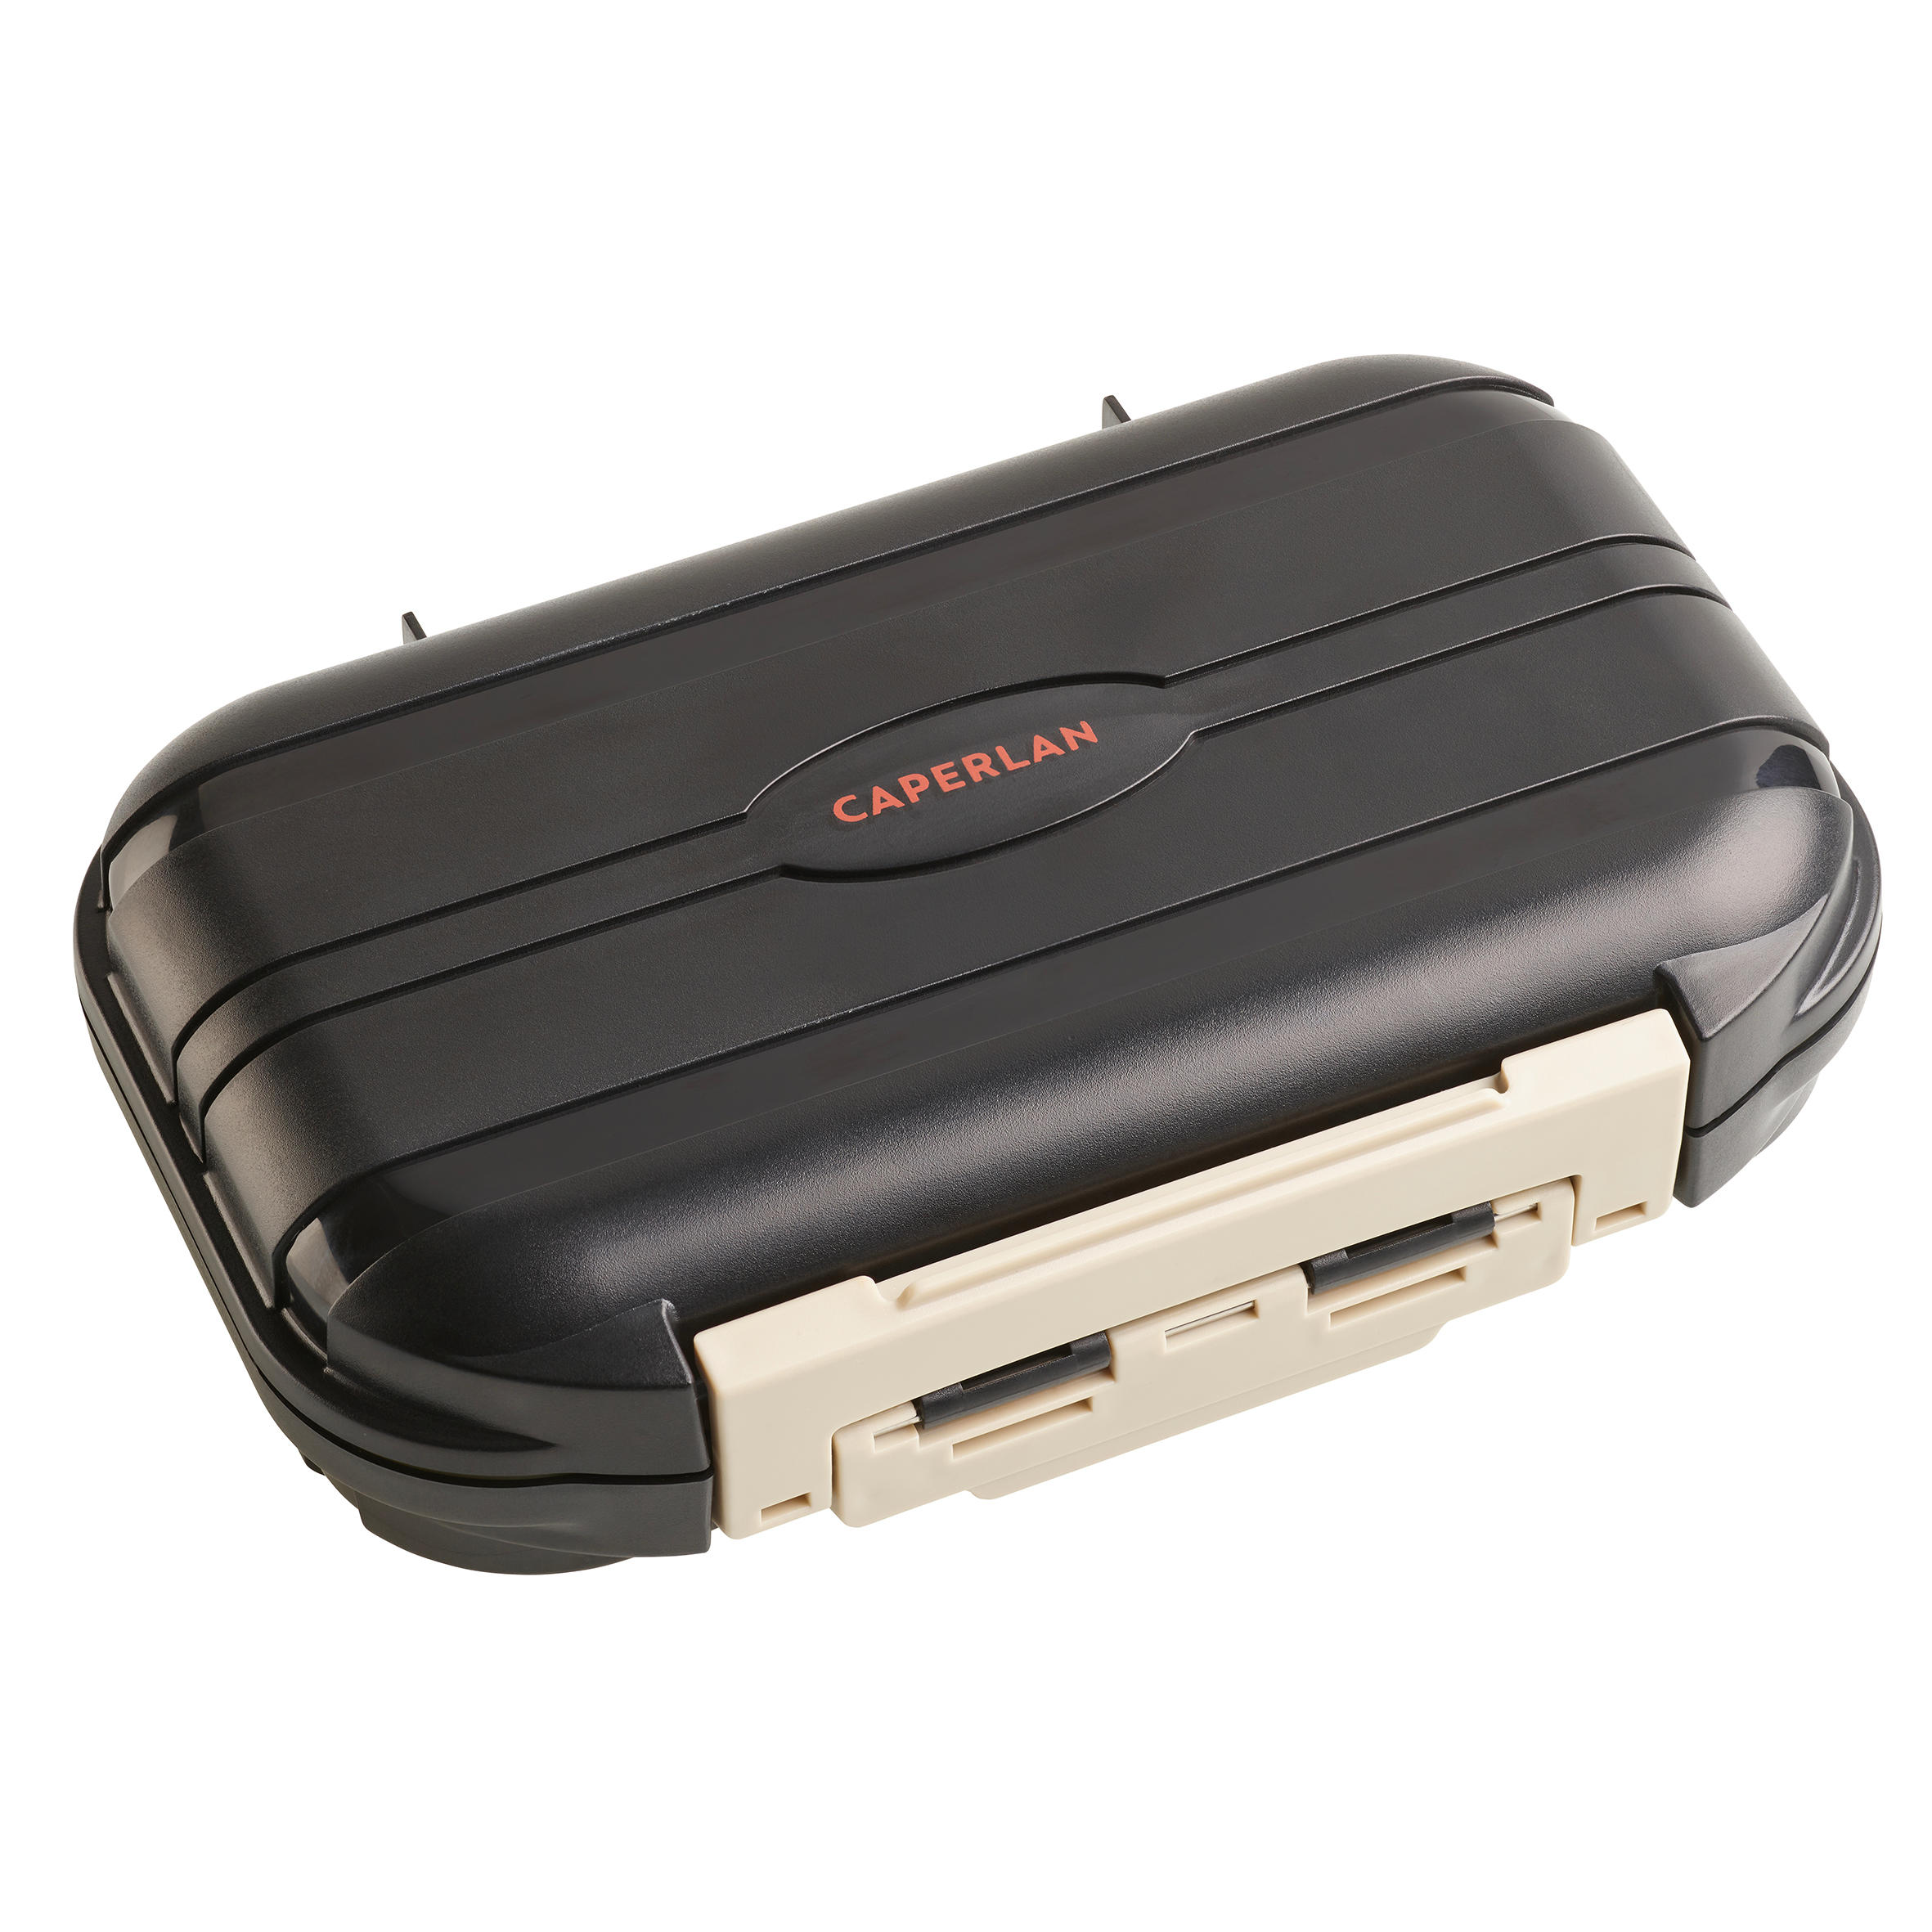 FLY FISHING FLY BOX L - CAPERLAN